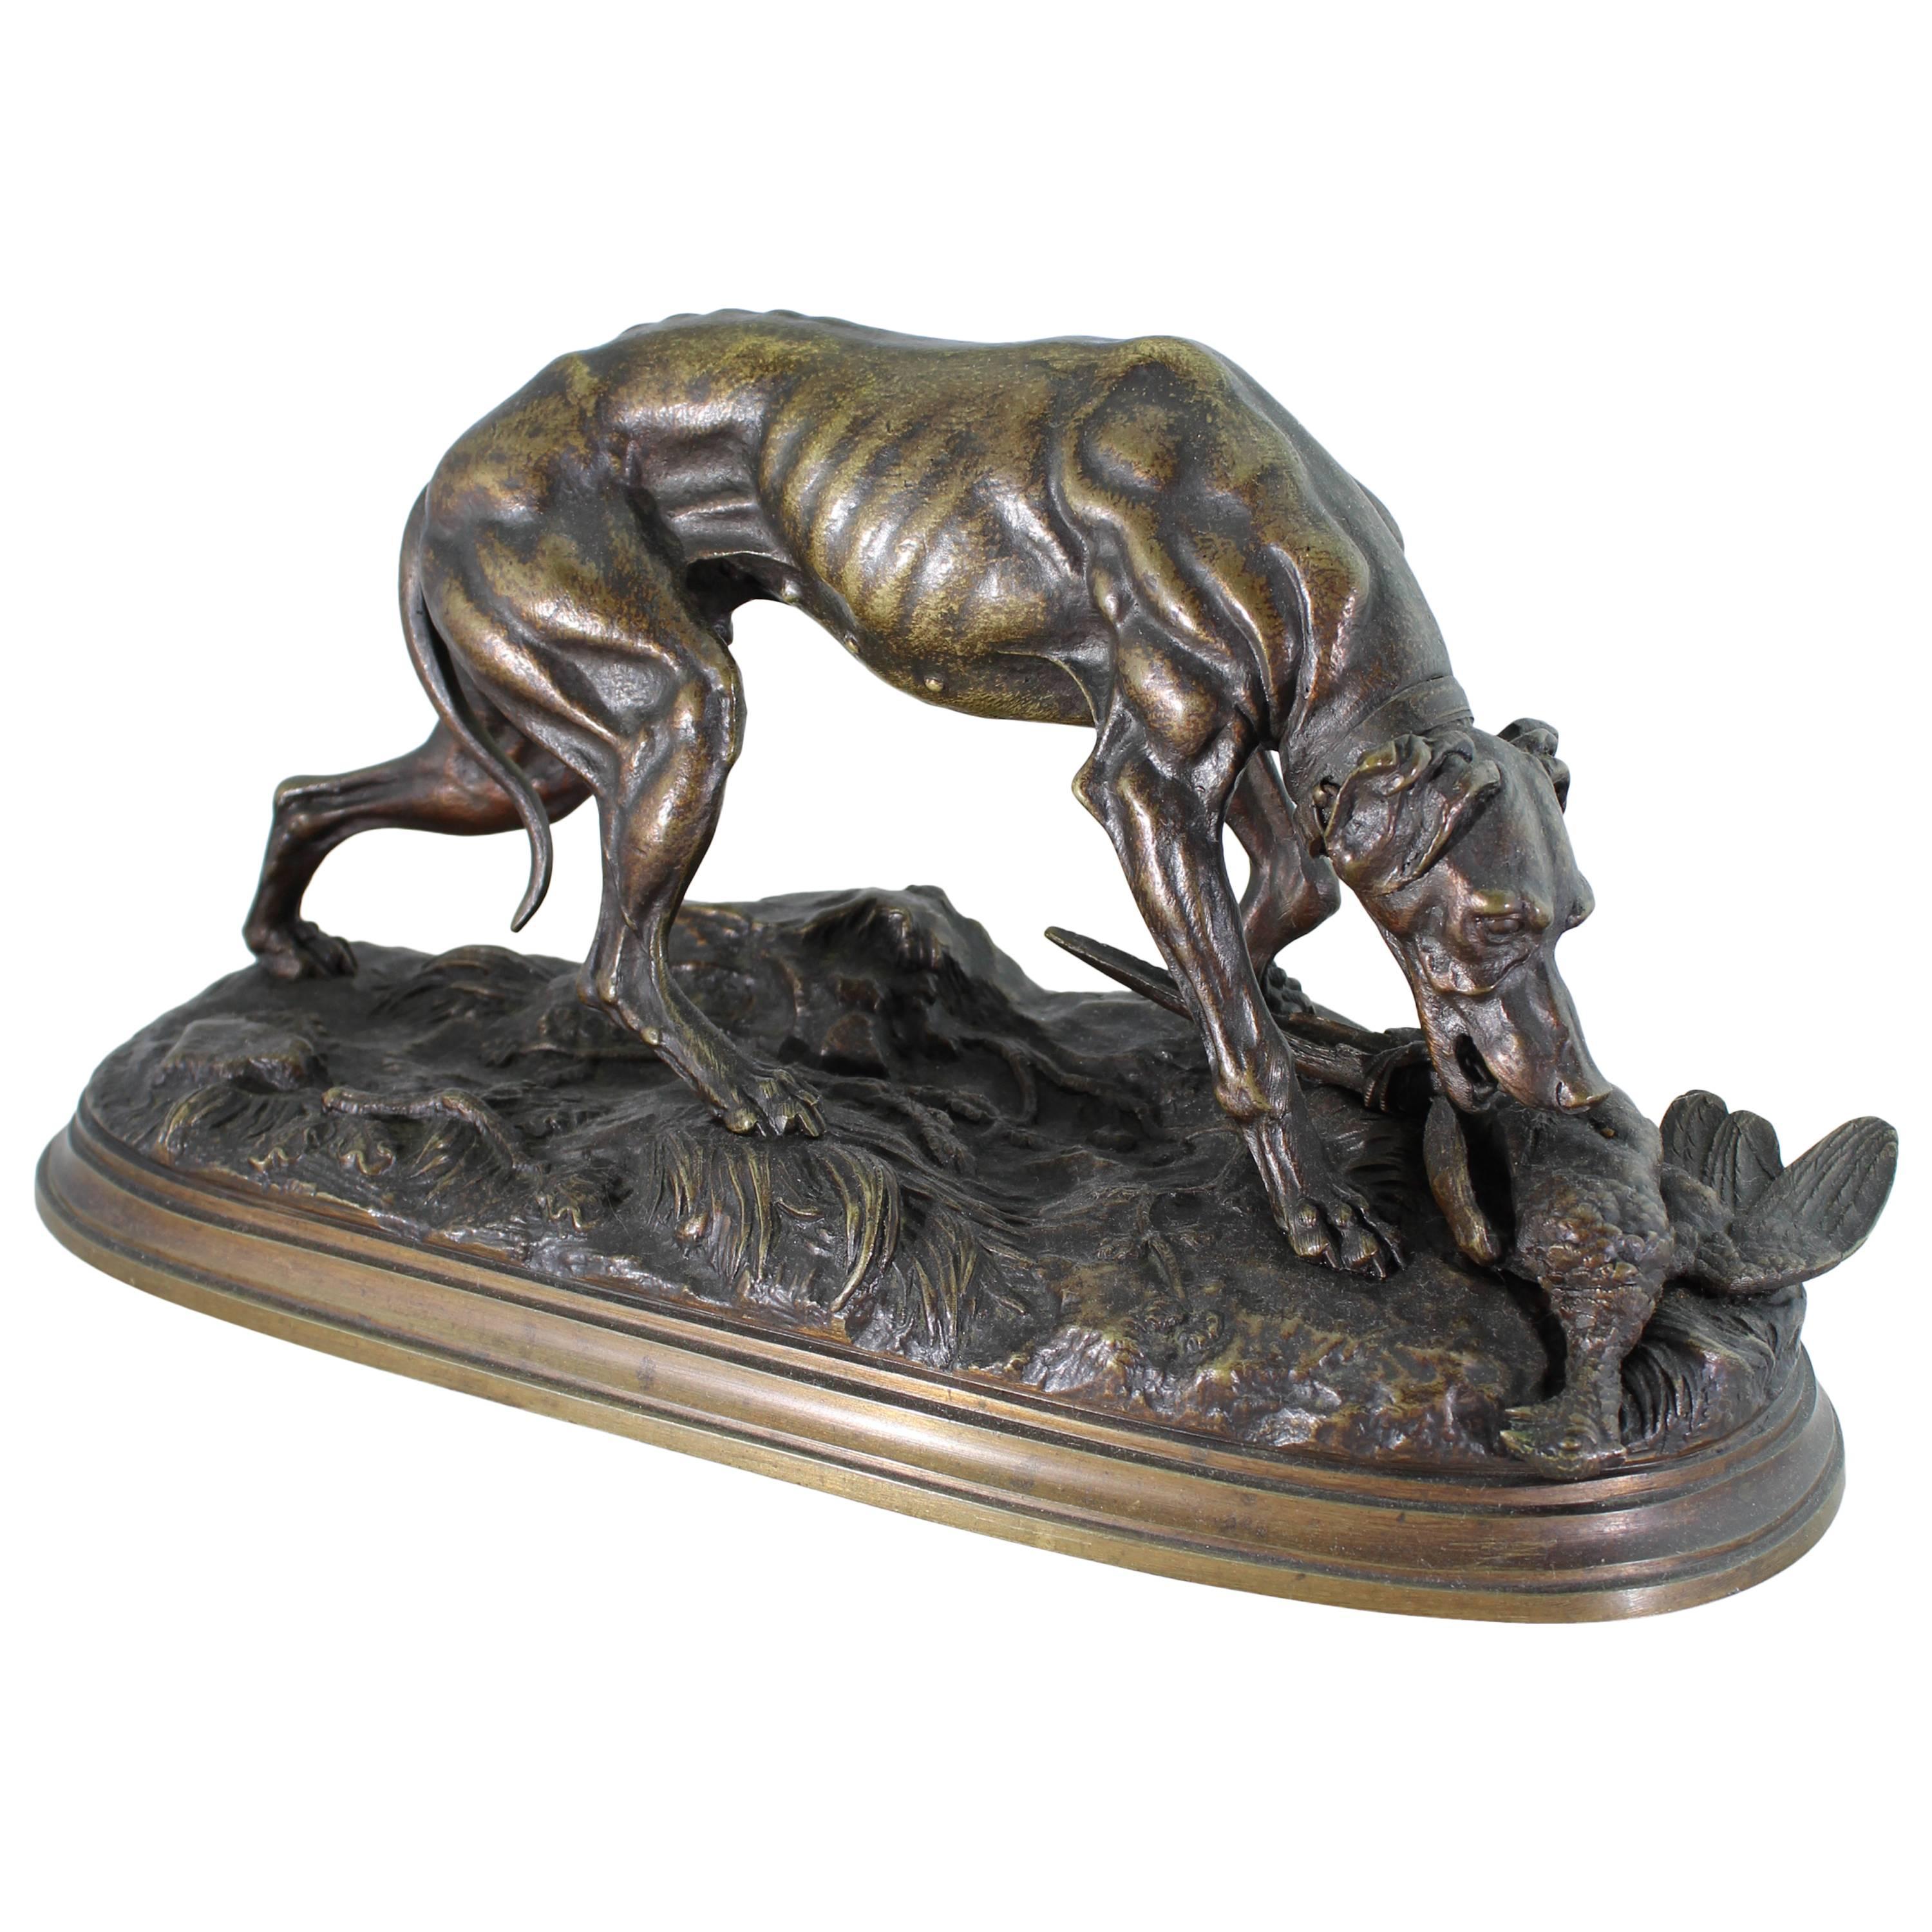 Image of Jules Moigniez Bronze Sculpture of a Pointer and Pheasant, 19th Century

Jules Moigniez Bronze Sculpture of a Pointer and Pheasant, circa 1874.

This is a large, stunning and moving bronze figure by Jules Moigniez executed in the 19th